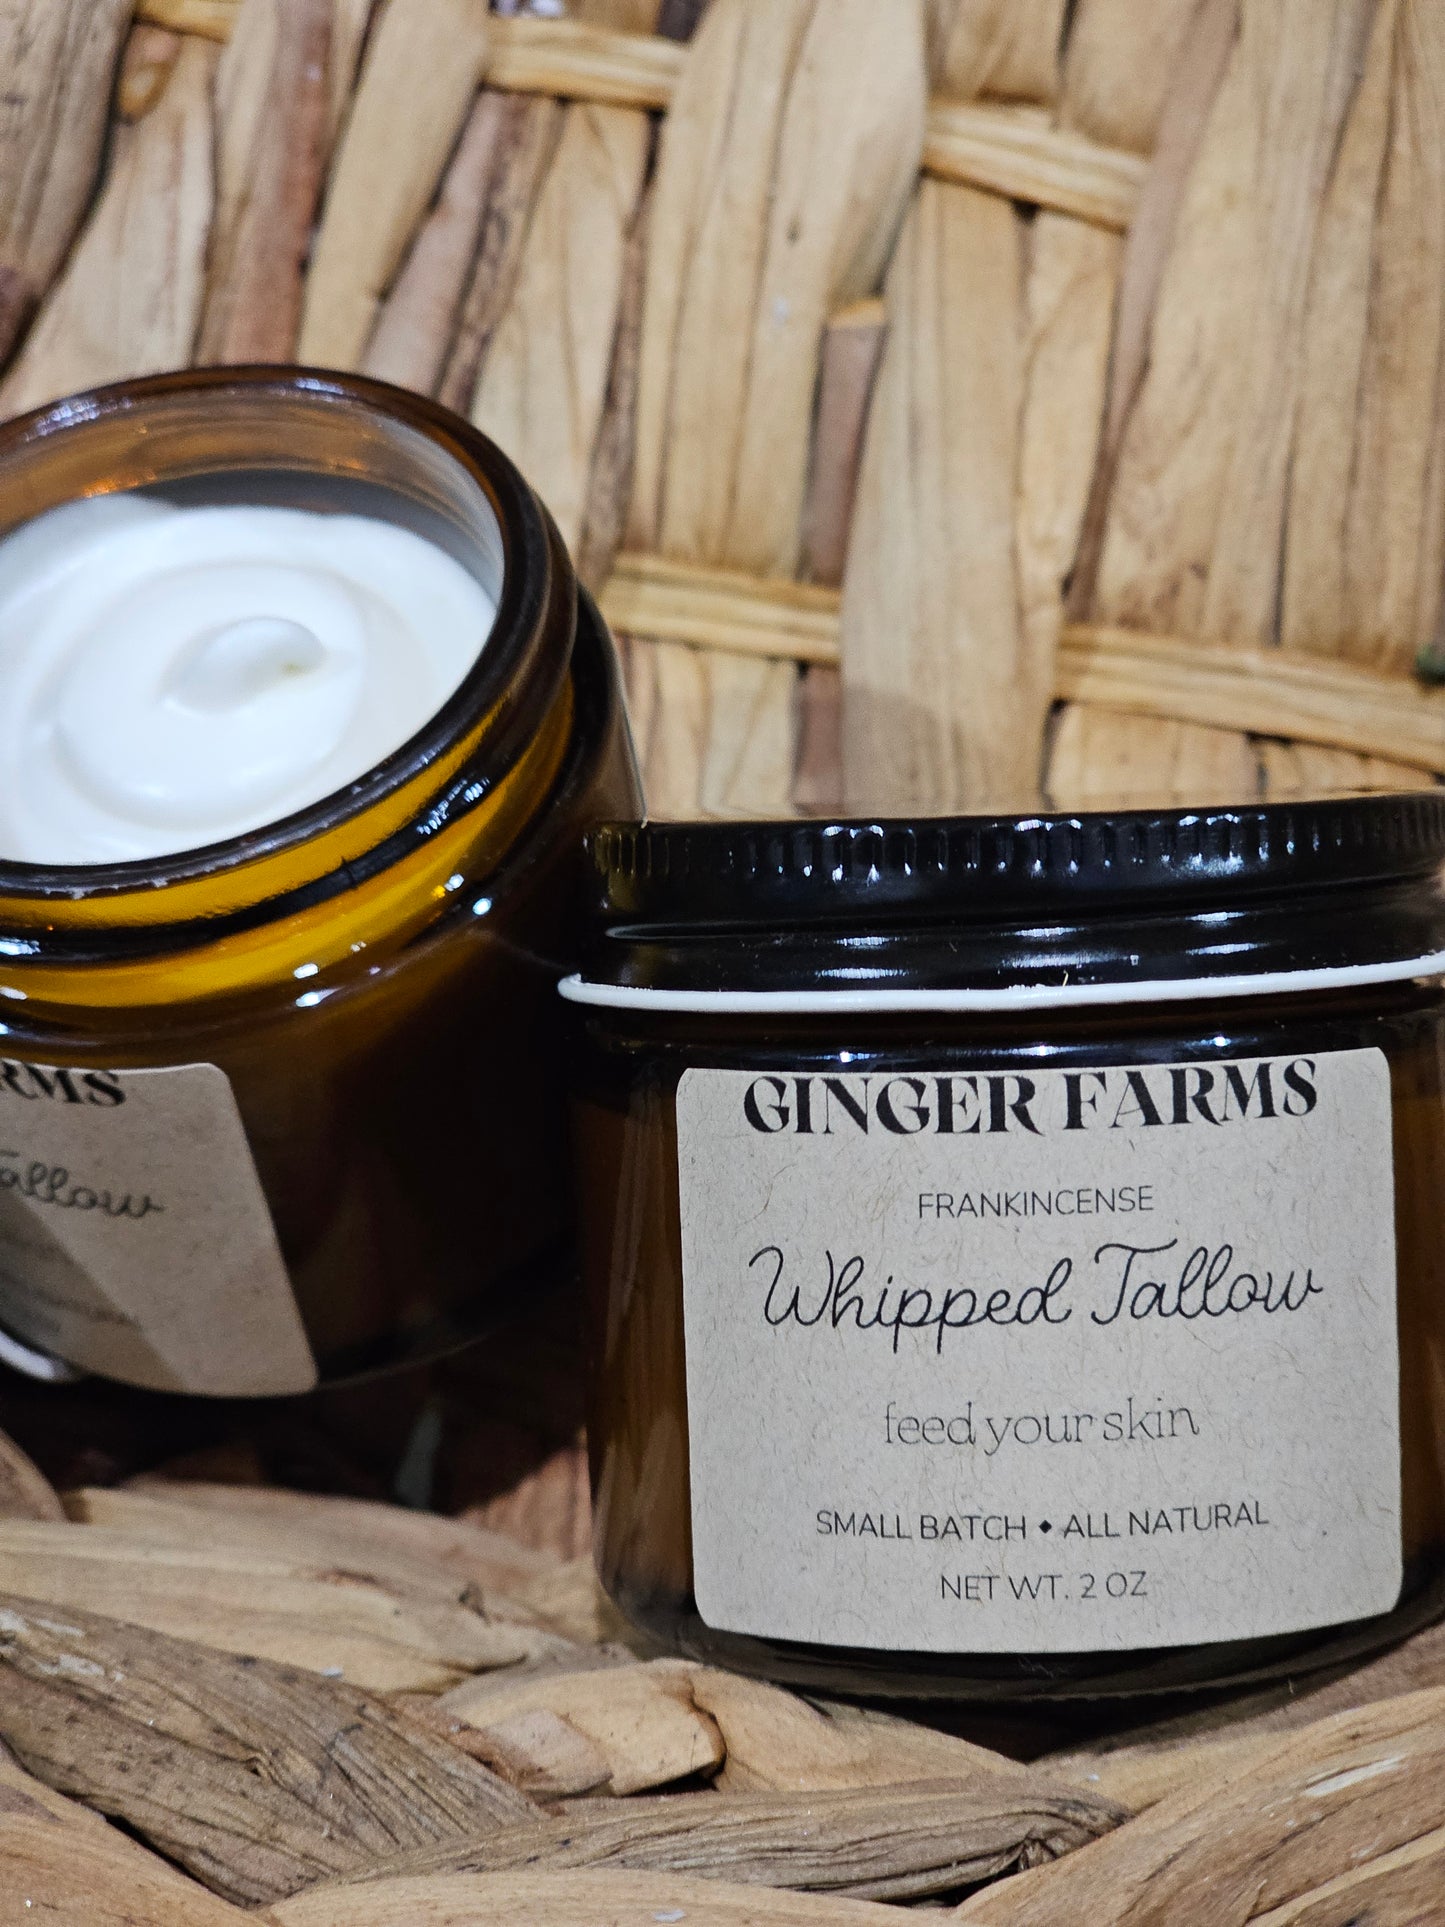 Whipped tallow